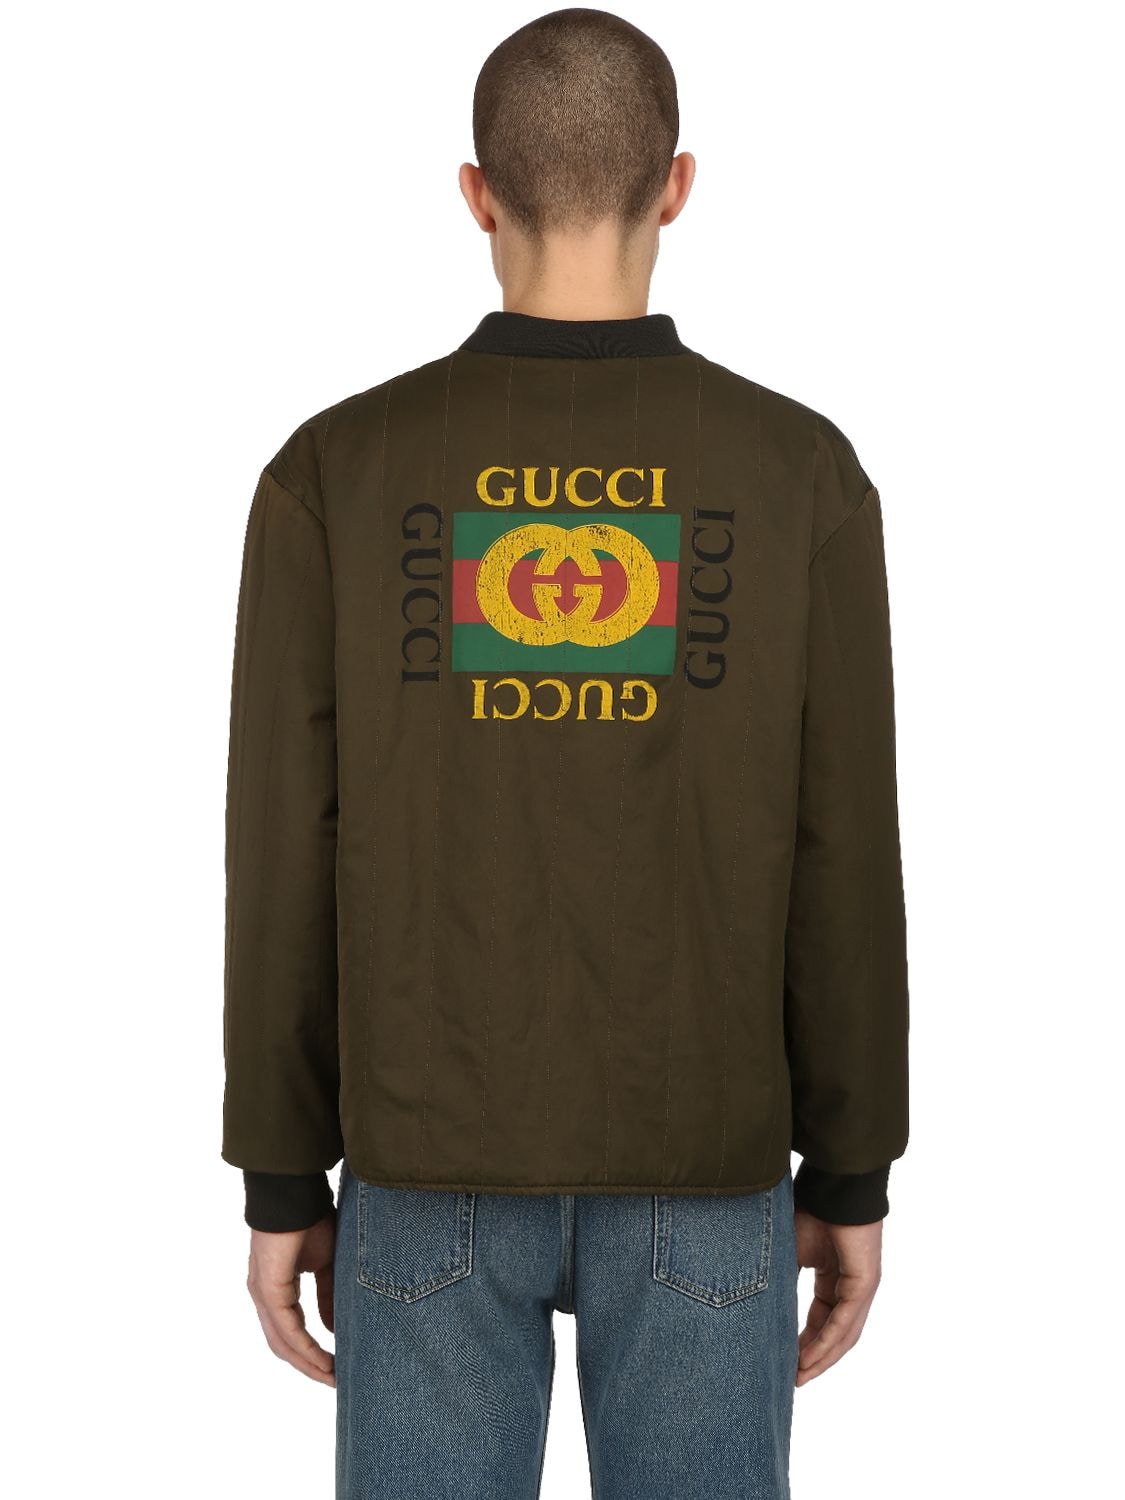 Gucci Reversible Satin Bomber Jacket In Olive Green